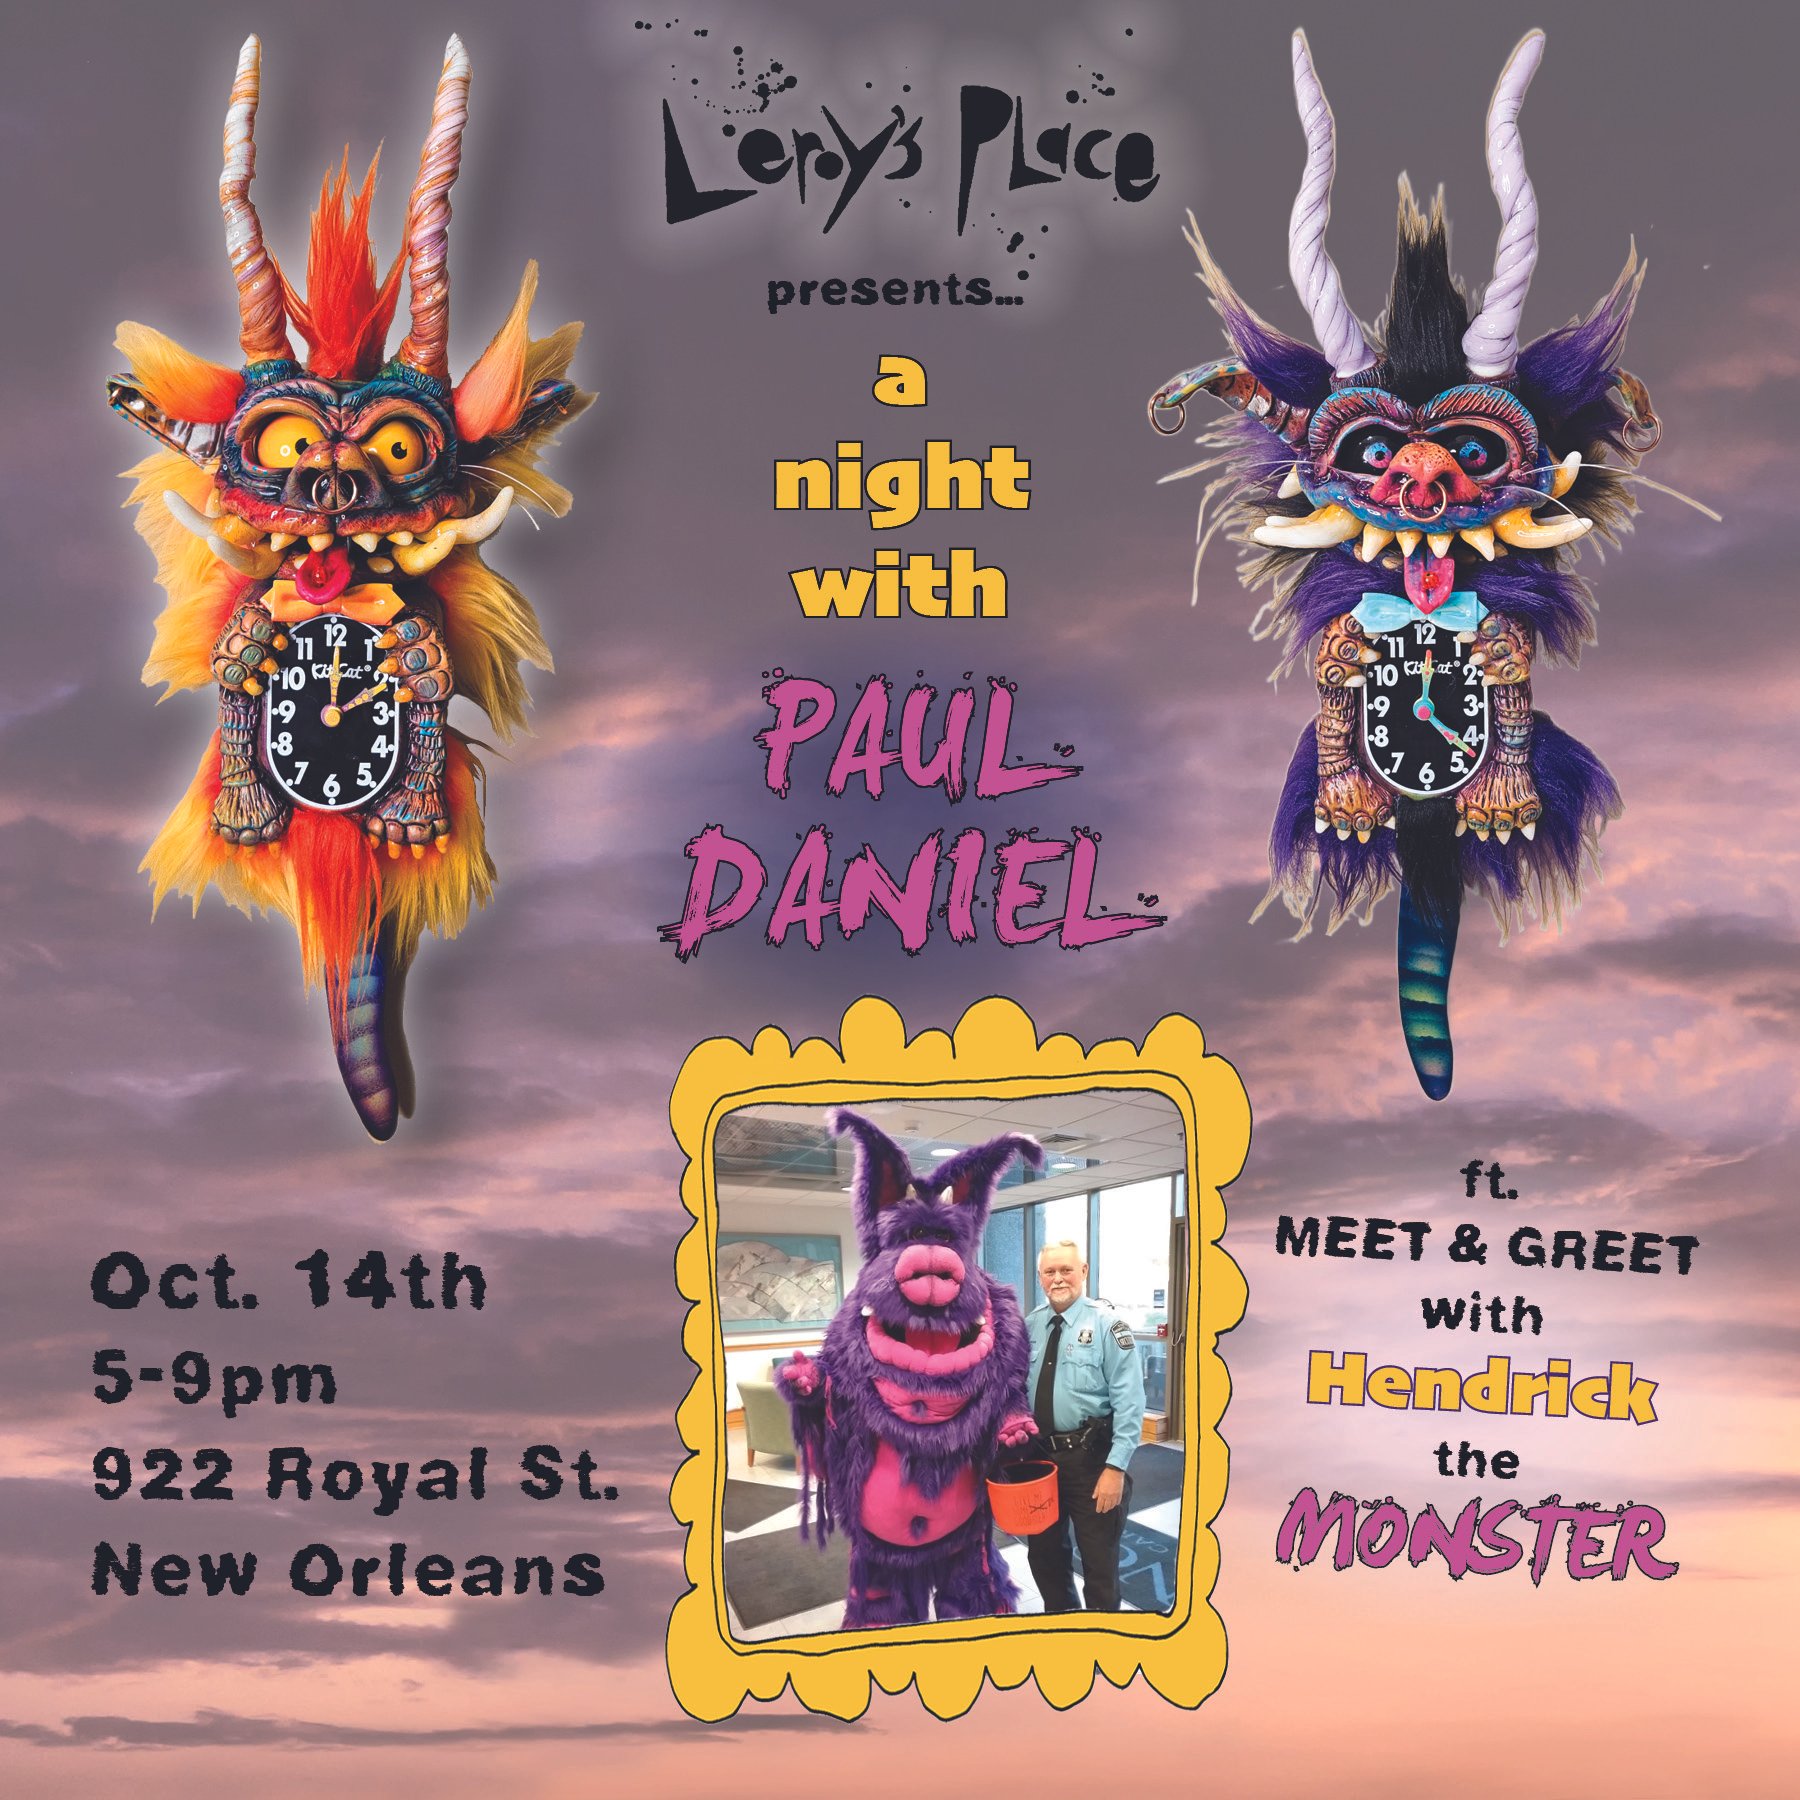 Leroy's Place presents a night with Paul Daniel